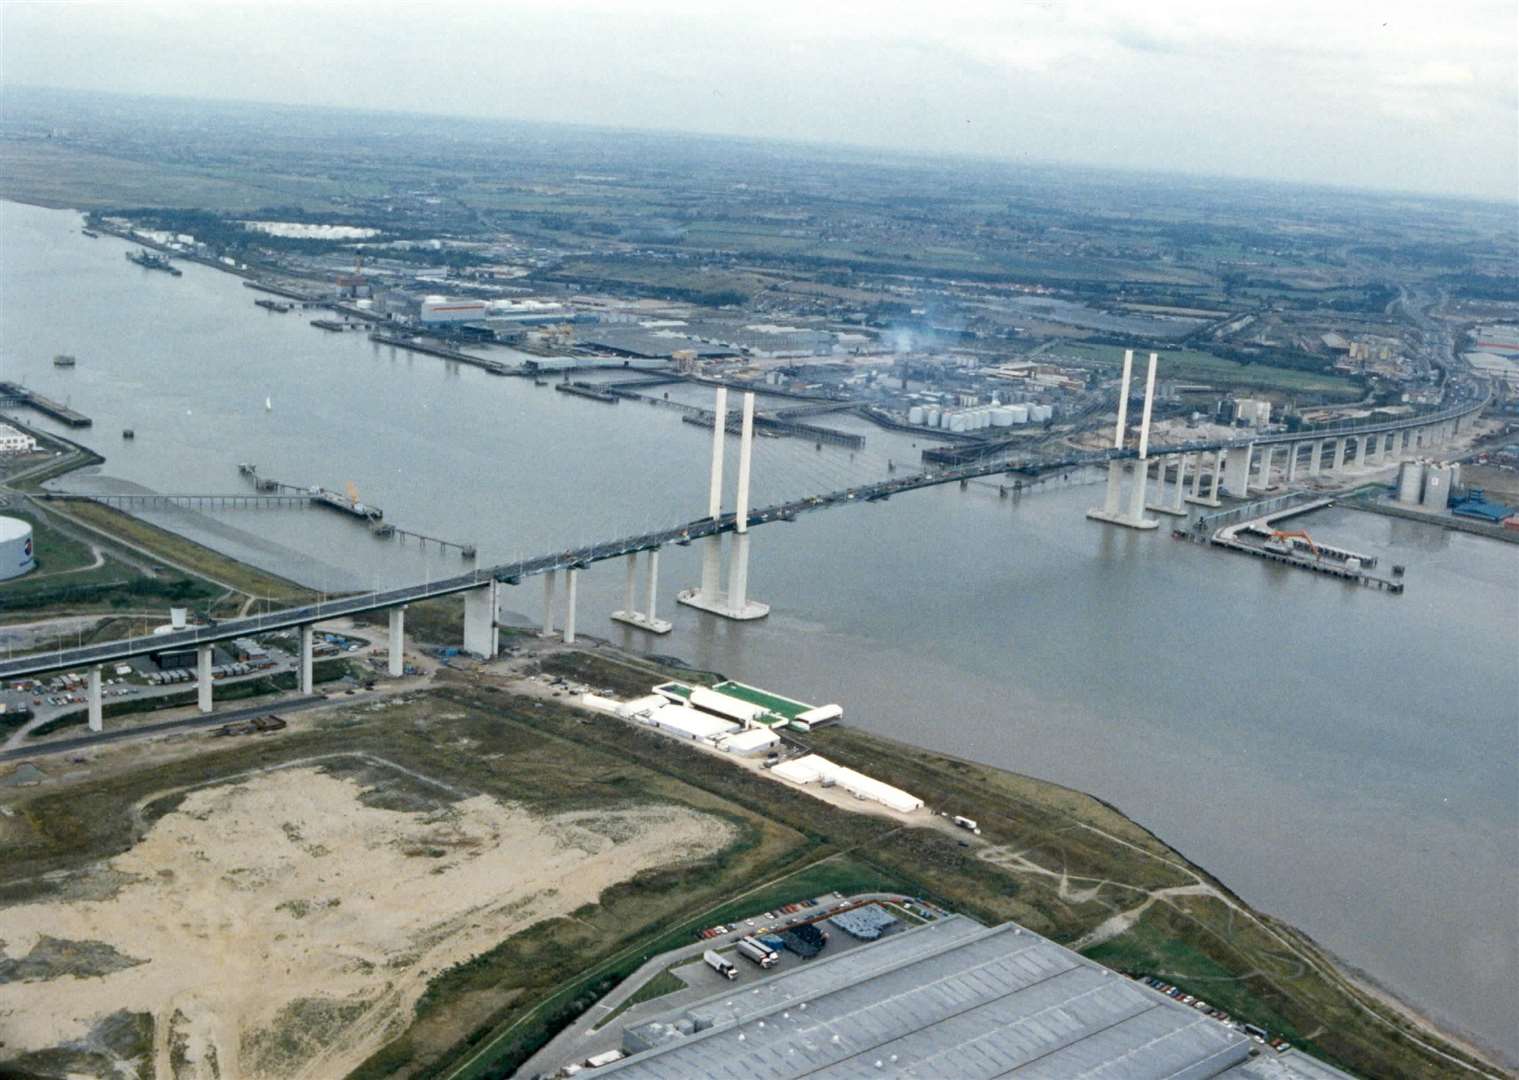 The Dartford Crossing pictured in 1991. The QEII bridge opened in that year, following a £120 million construction project